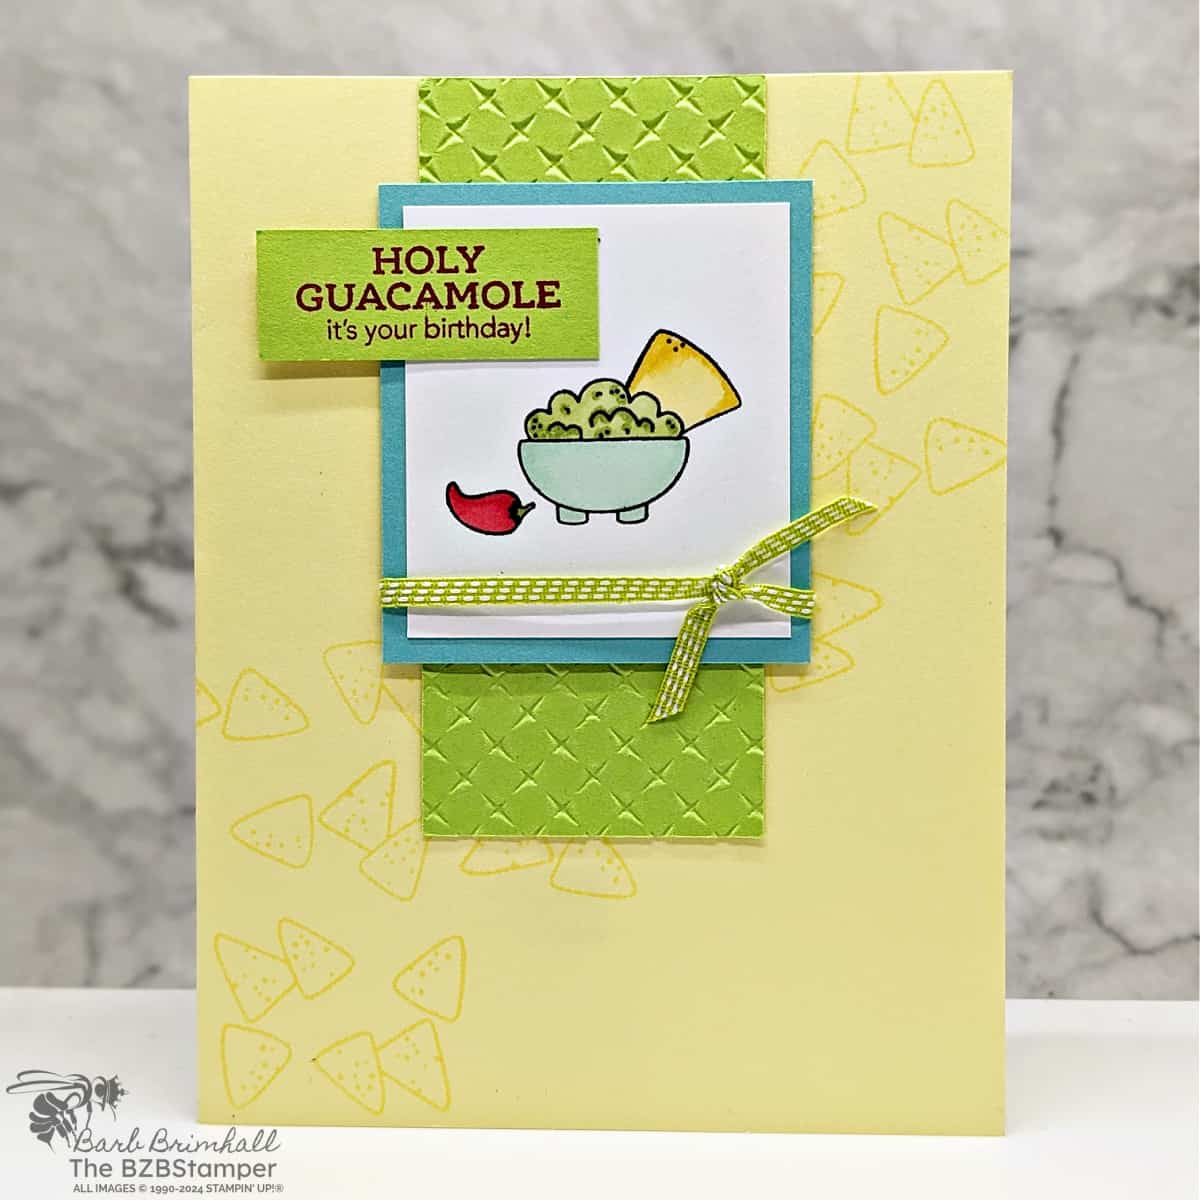 Holy Guacamole: The Taco Fiesta Stamp Set